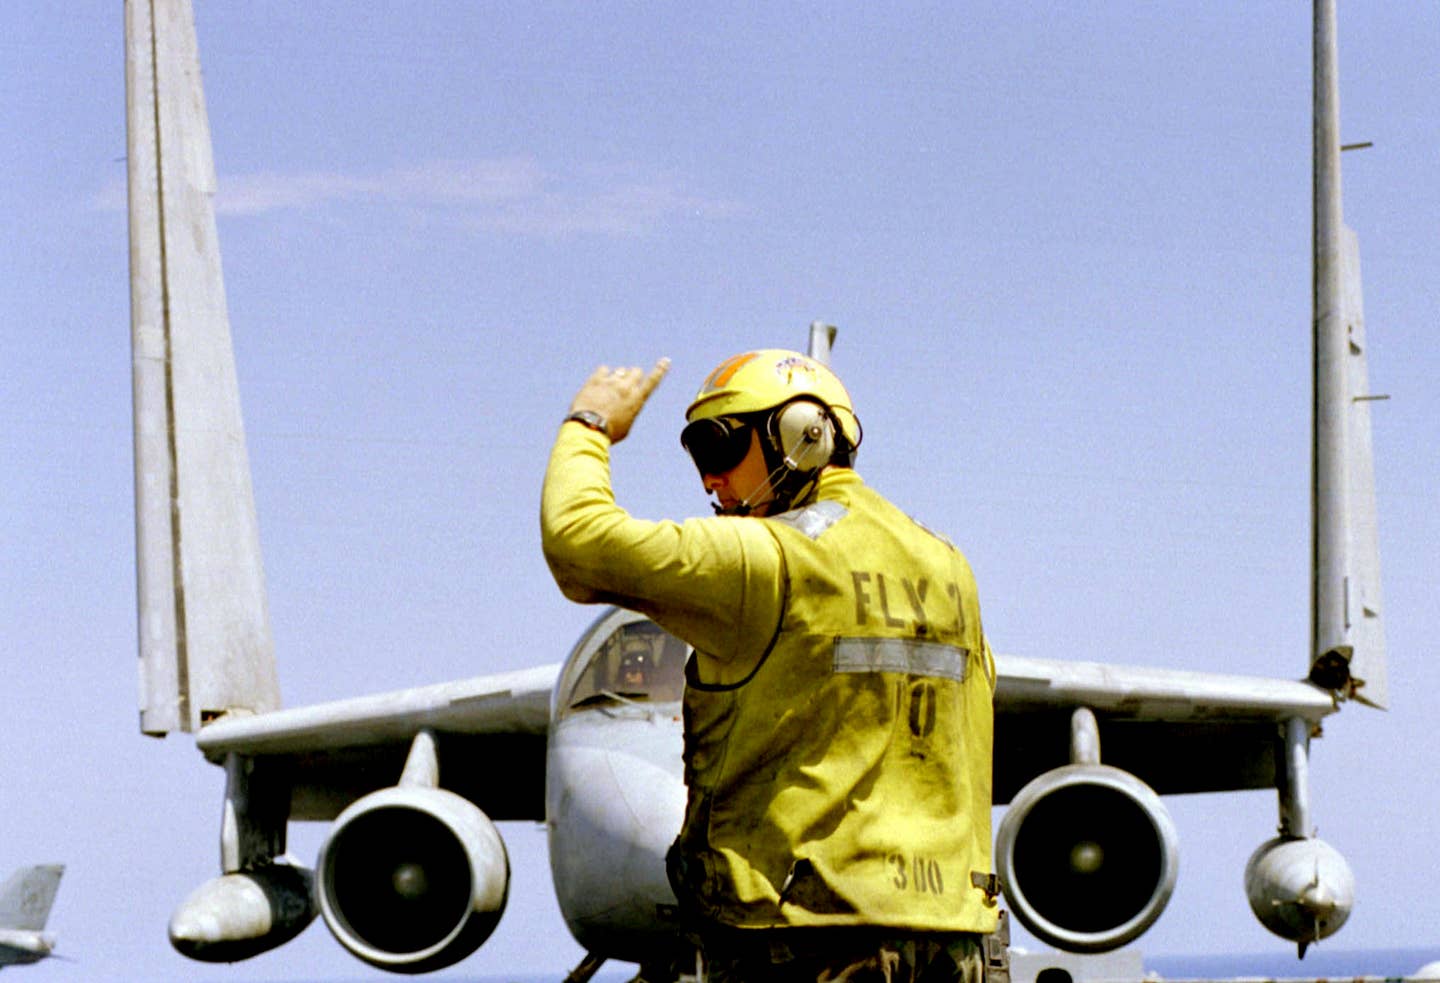 The Fly 3 Petty Officer directs an S-3B Viking from VS-24 as it folds its wings on the flight deck of the USS <em>Theodore Roosevelt</em> (CVN-71) on May 5, 1999, after completing an Operation Allied Force mission over the former Yugoslavia. <em>Petty Officer 3rd Class Donne McKissic/USN</em>